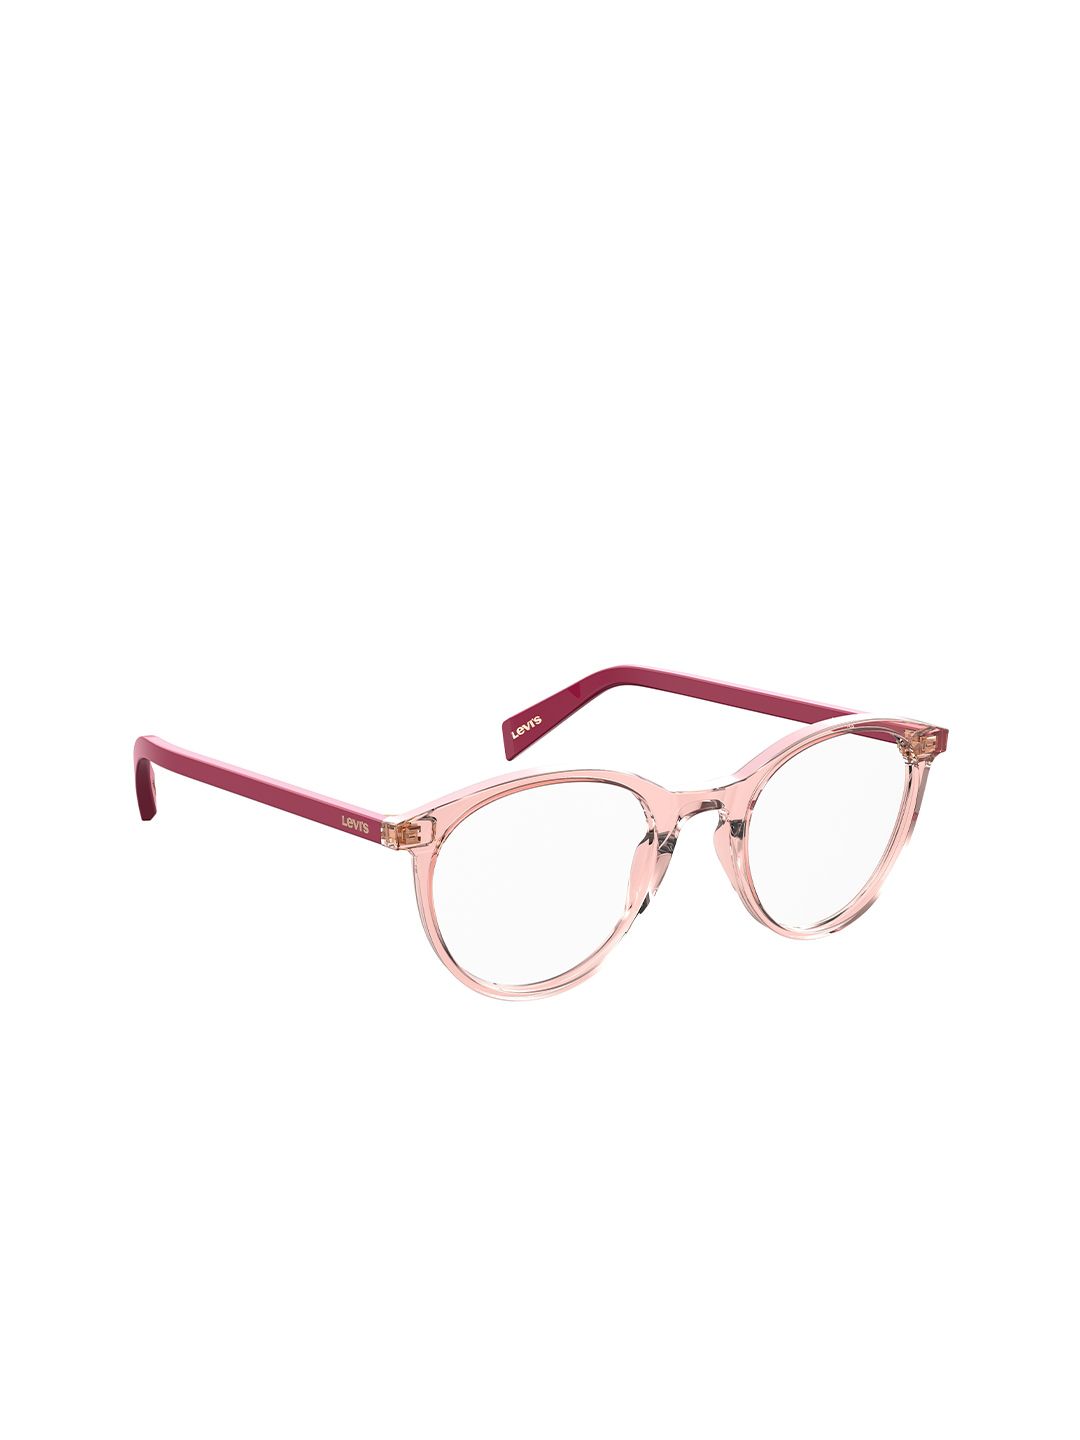 Levis Unisex Clear Lens & Pink Oval Sunglasses with Polarised Lens Price in India